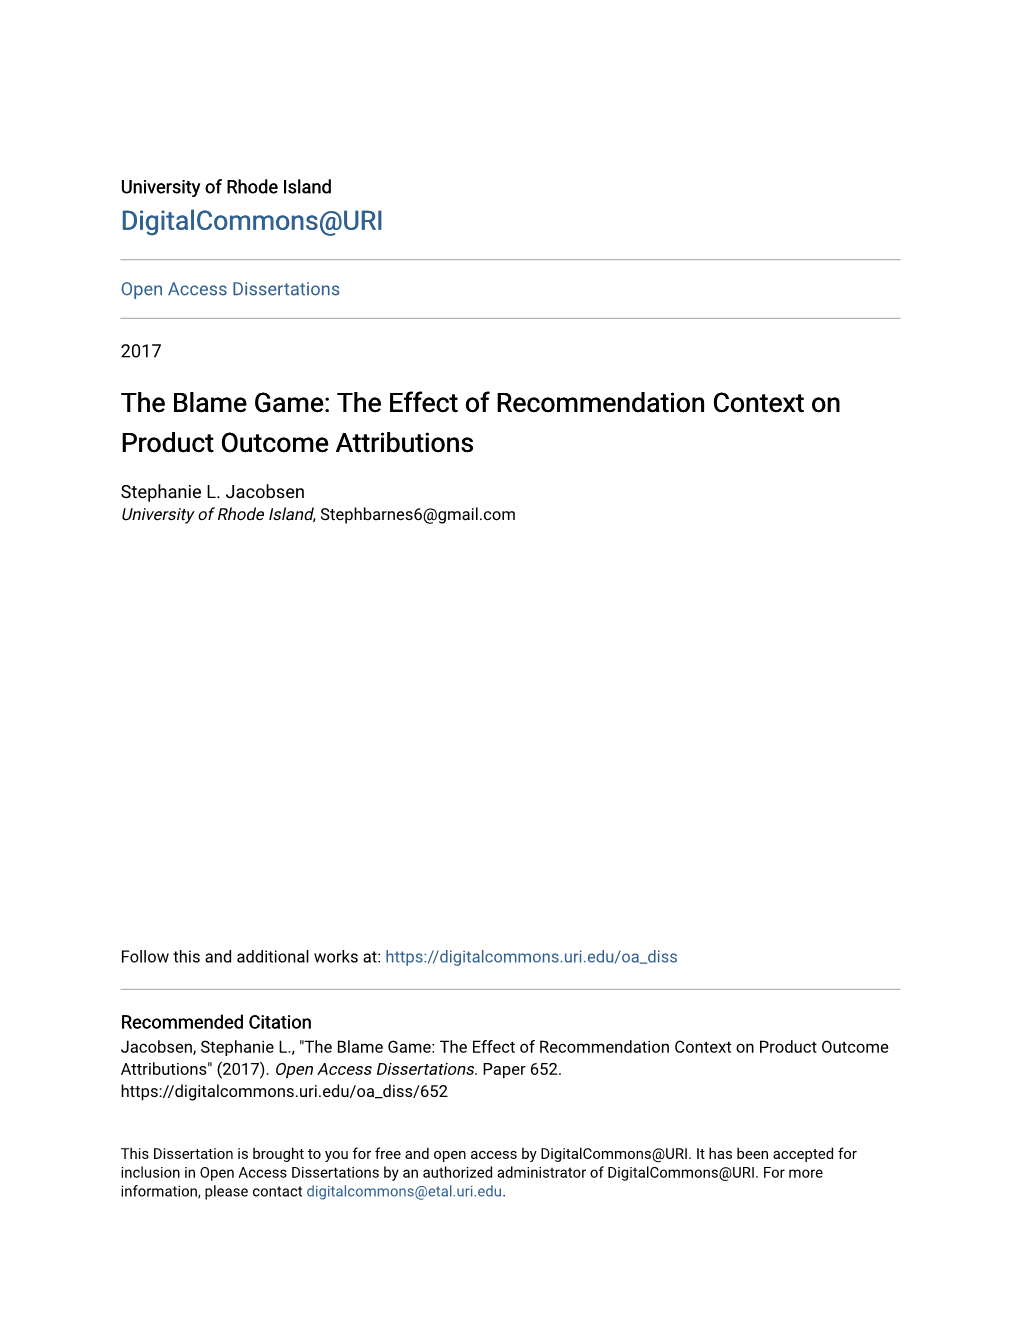 The Blame Game: the Effect of Recommendation Context on Product Outcome Attributions